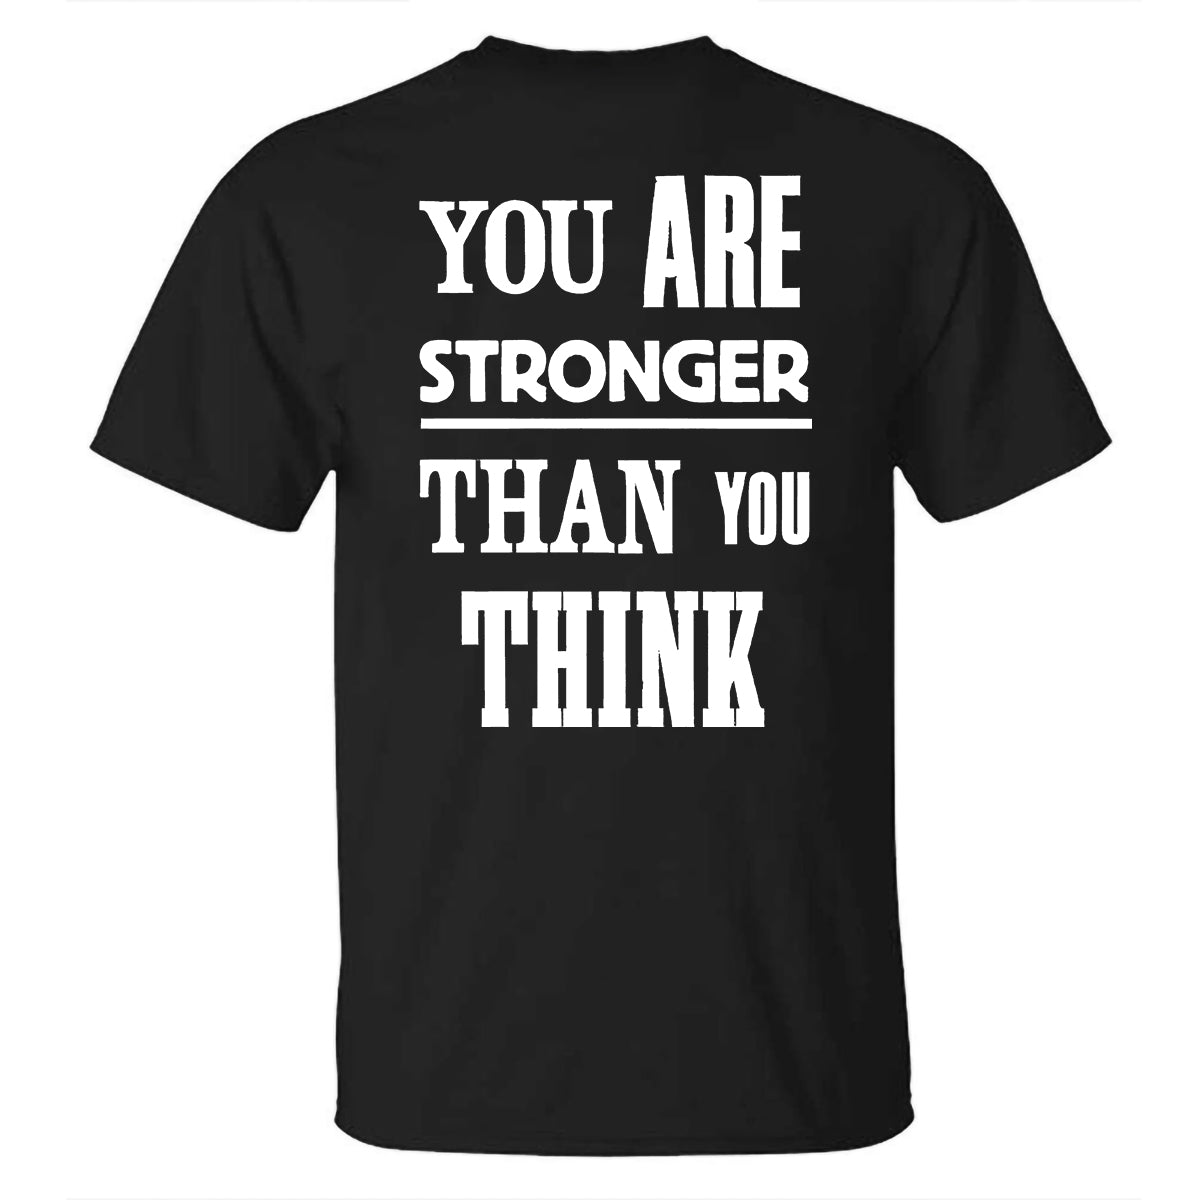 You Are Stronger Than You Think Printed T-shirt